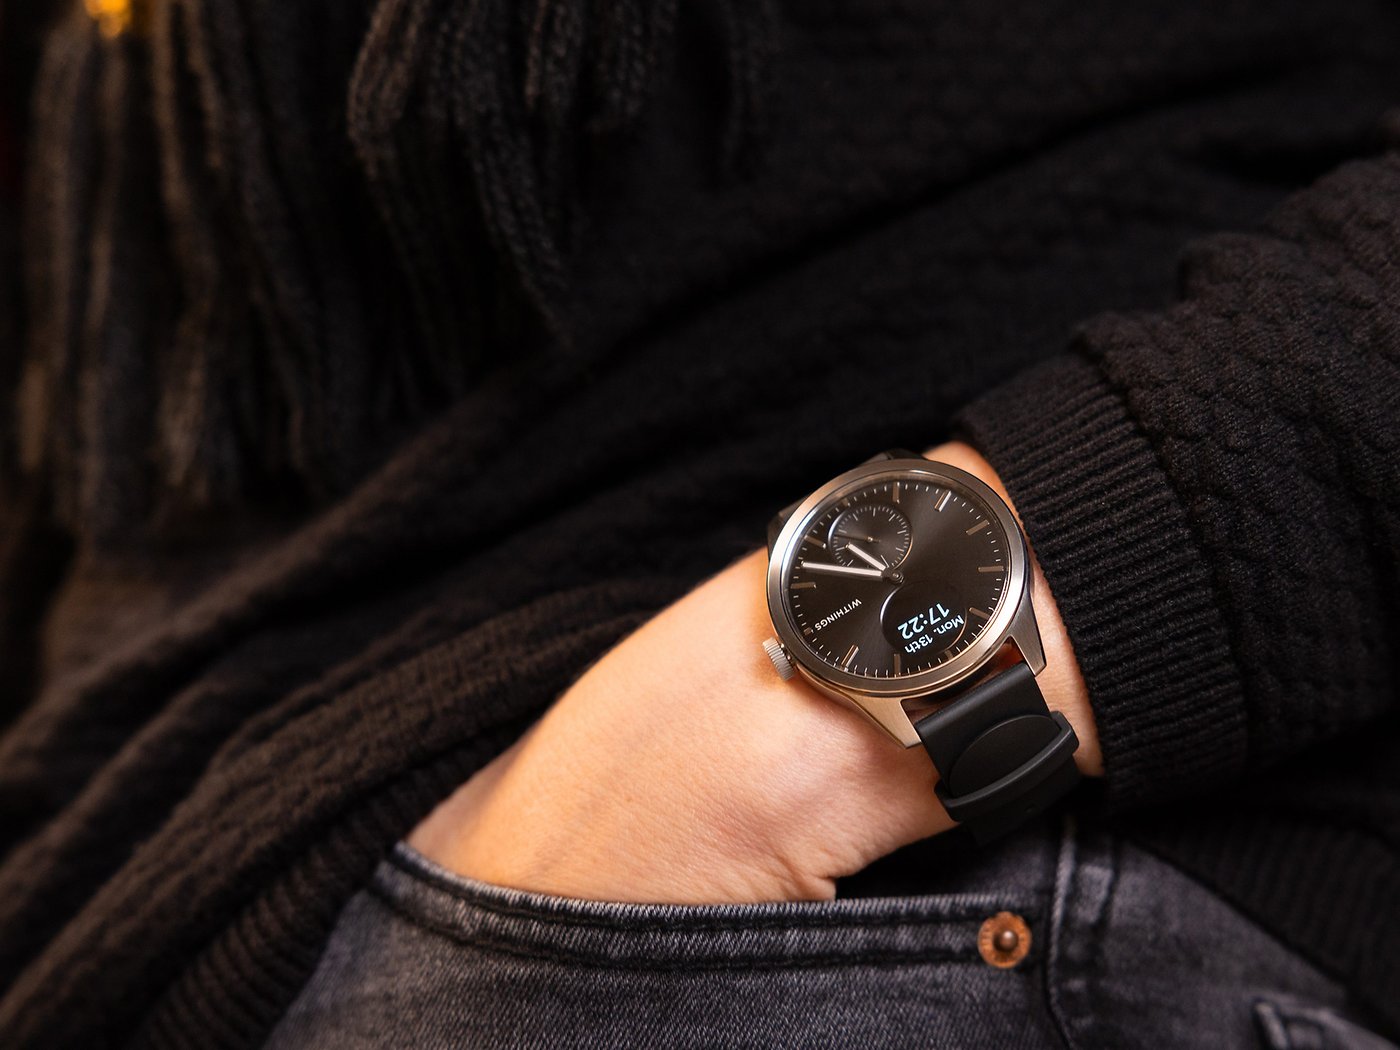 Withings combines its two best watches into one with the luxury ScanWatch  Nova